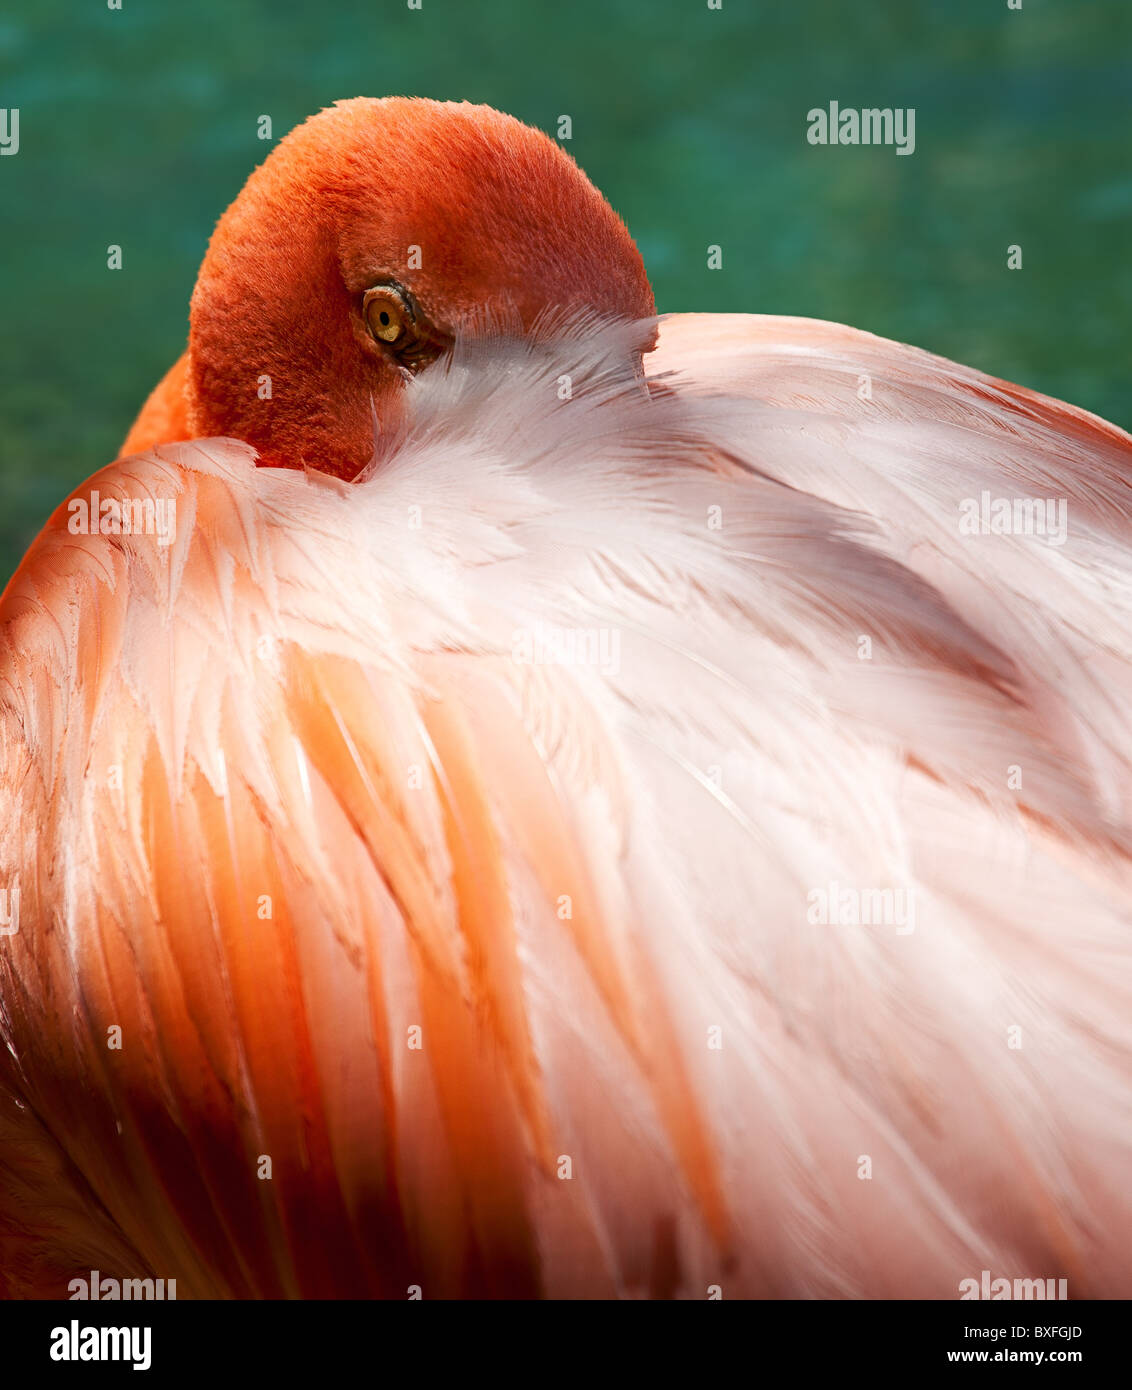 Close up image of a pink flamingo with its head peering out from behind the feathers on its back Stock Photo